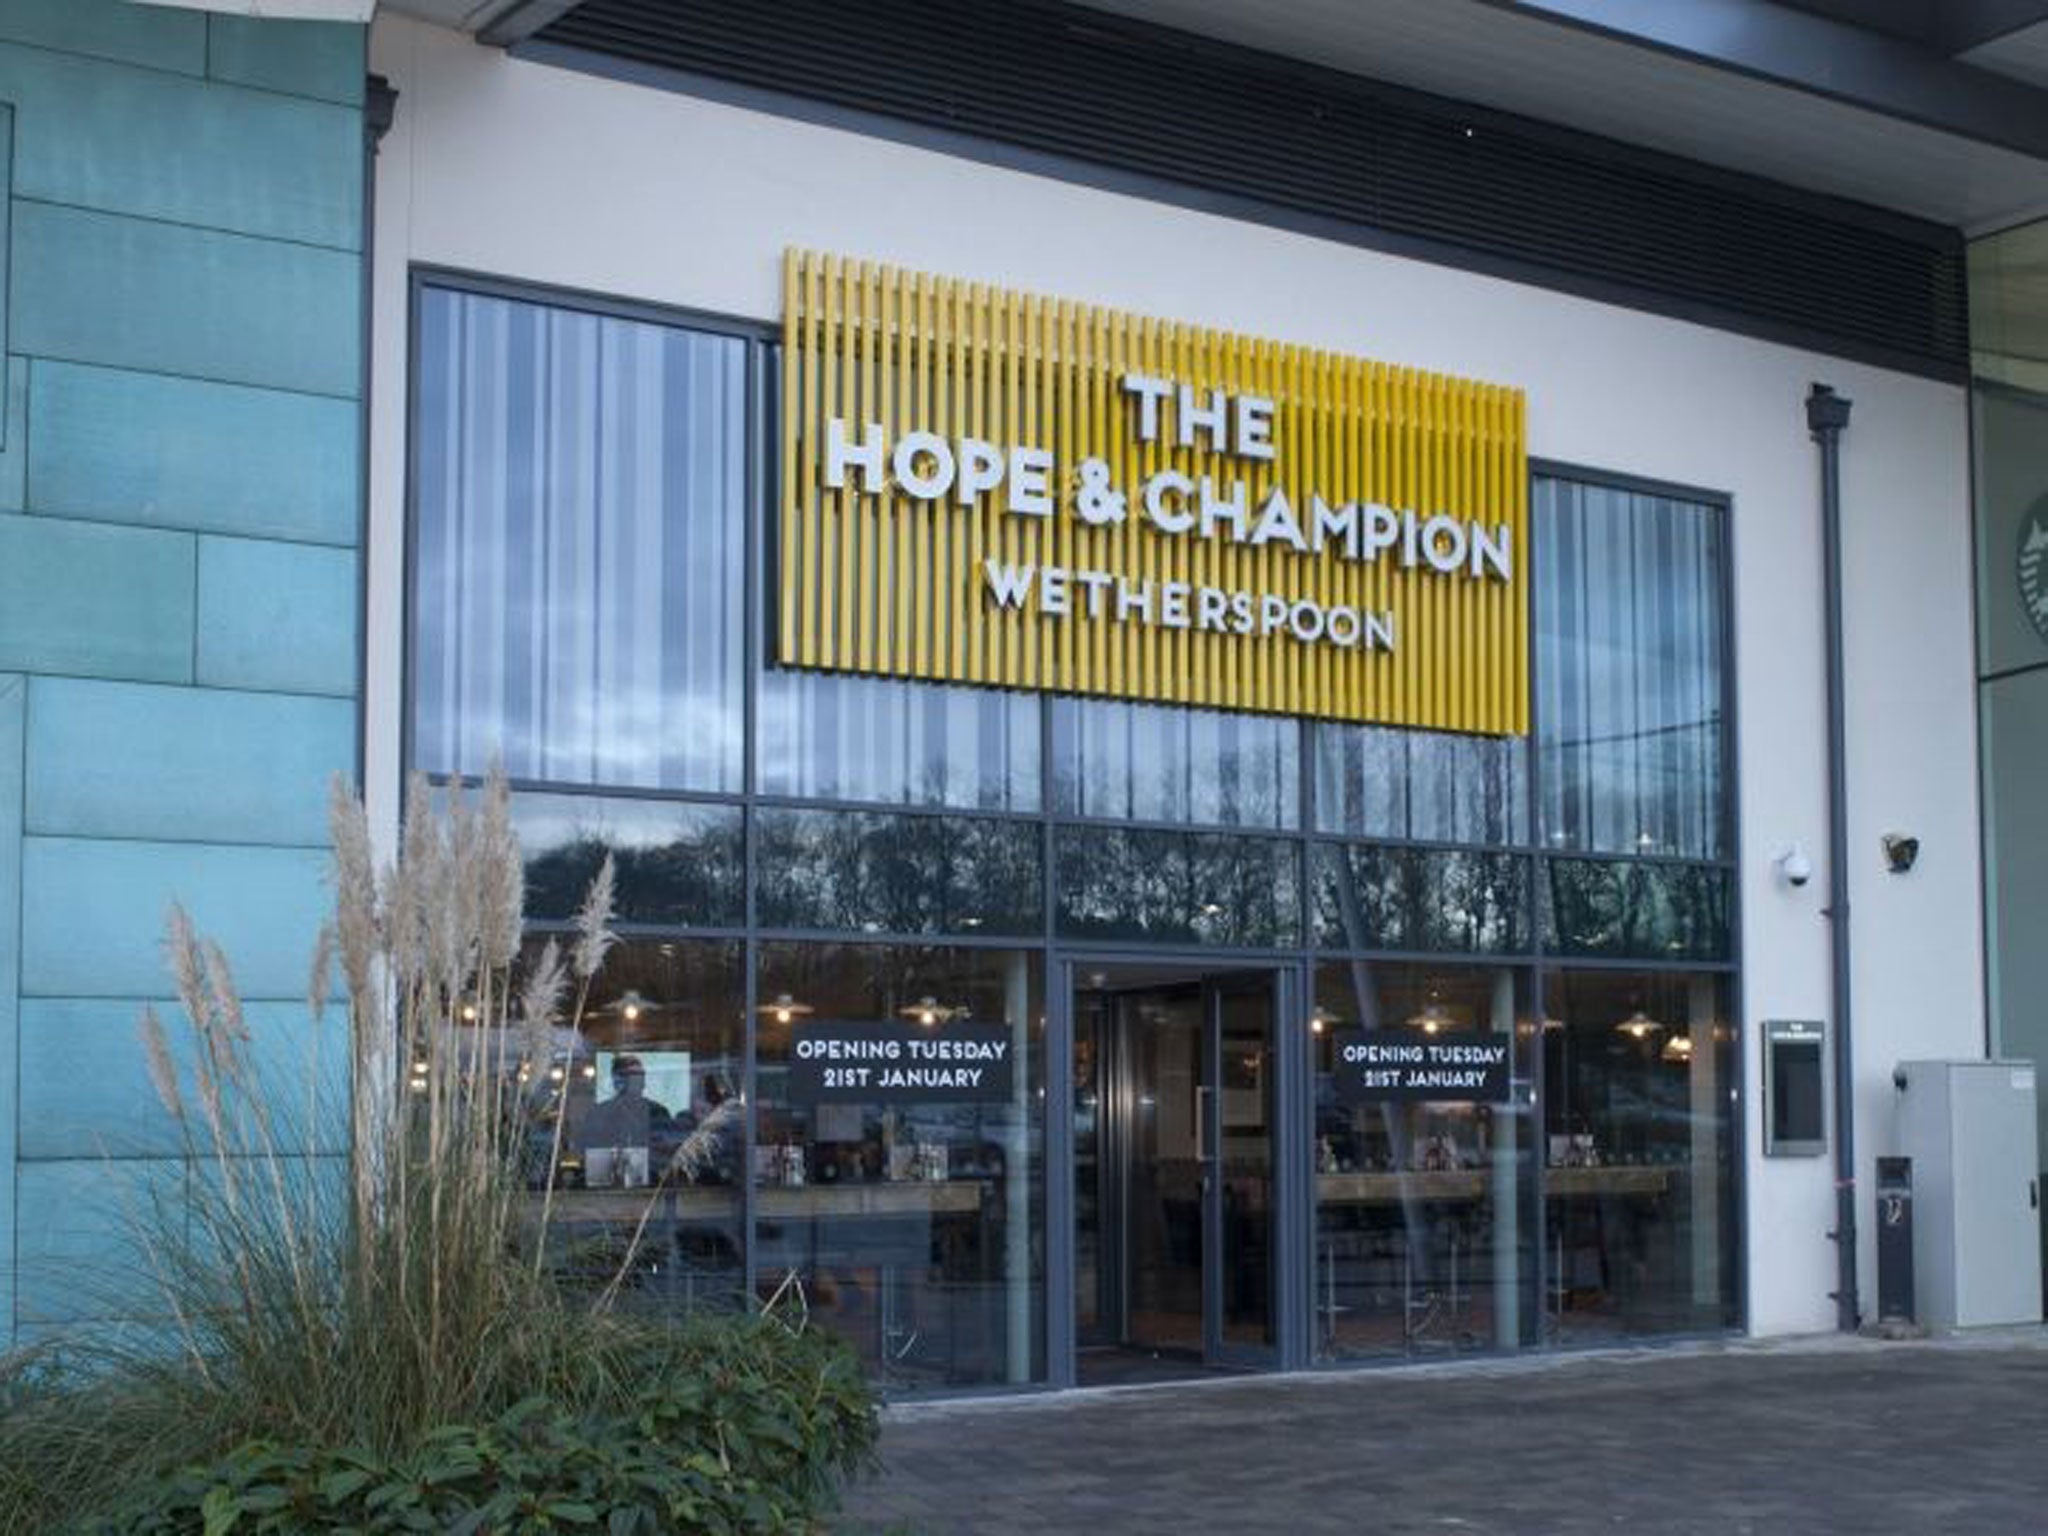 The new JD Wetherspoon pub which opened at the Extra Motorway Service Area at junction 2 of the M40 in Beaconsfield